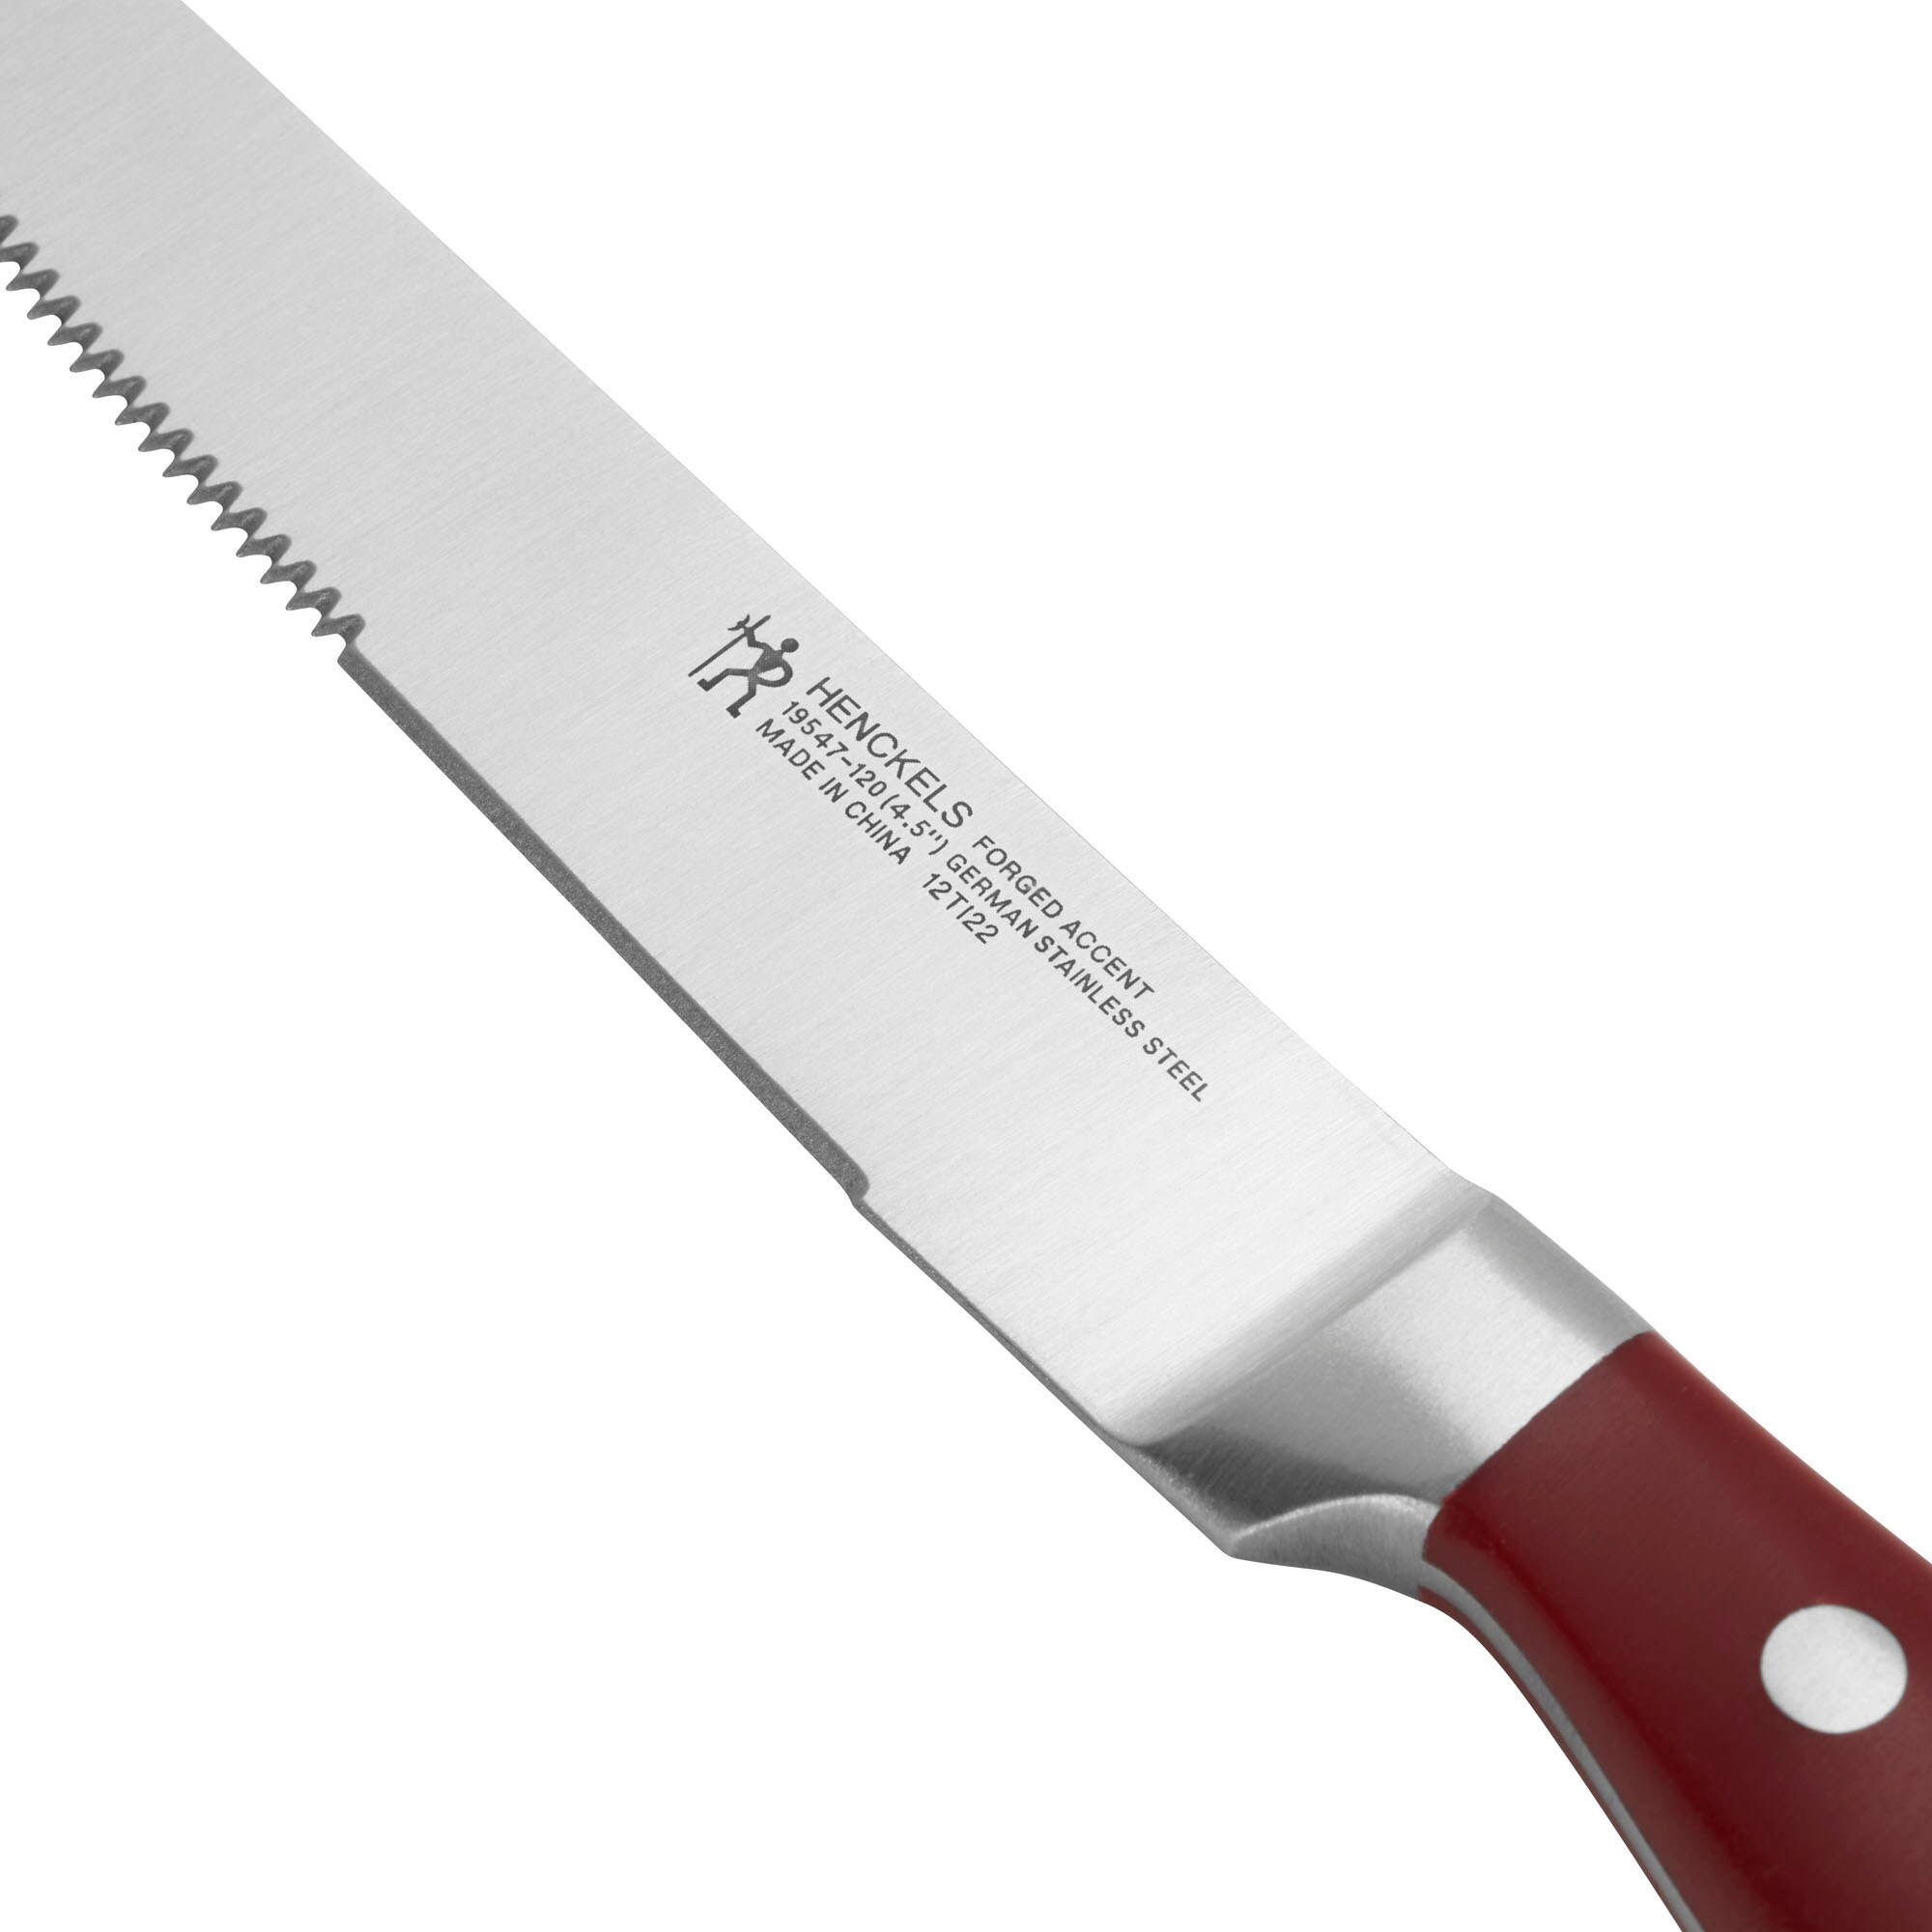 https://ak1.ostkcdn.com/images/products/is/images/direct/b334287fa976ba189a923899cb84c78e25a35fdf/HENCKELS-Forged-Accent-4-pc-Steak-Knife-Set.jpg